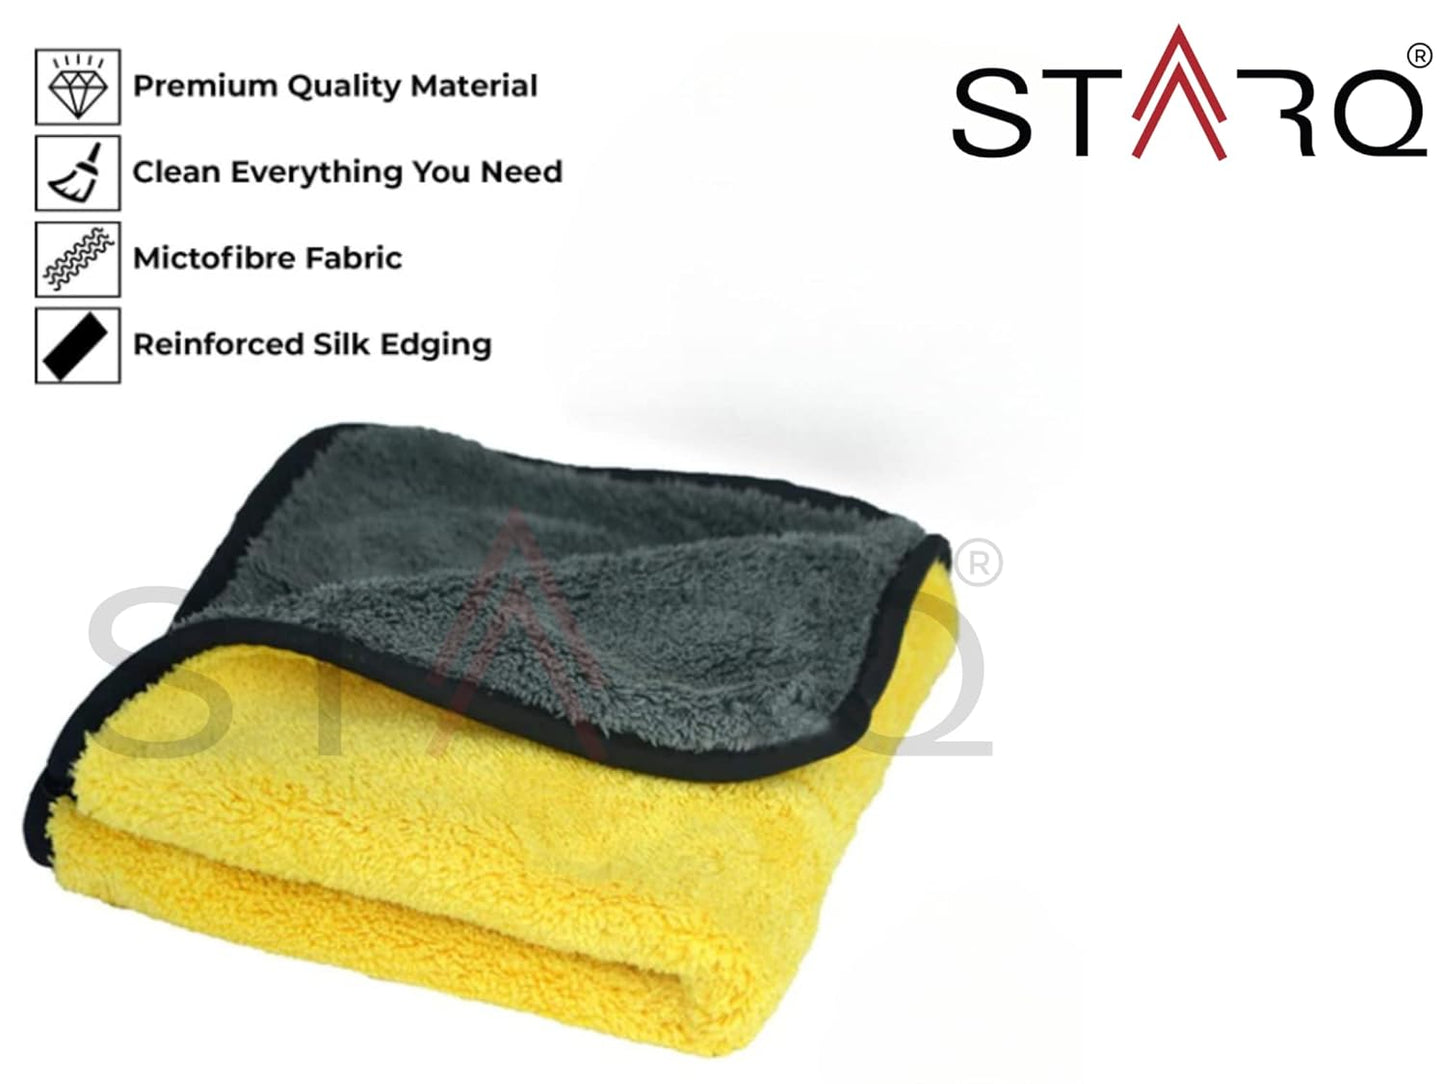 STARQ (PACK OF 3) Multipurpose Microfiber 800 GSM 40cm x 40cm Cleaning Towel Microfibre Cloth Highly Absorbent Dust Towels for All Vehicles Bikes Cars Glass Kitchens - Multicolour (3)